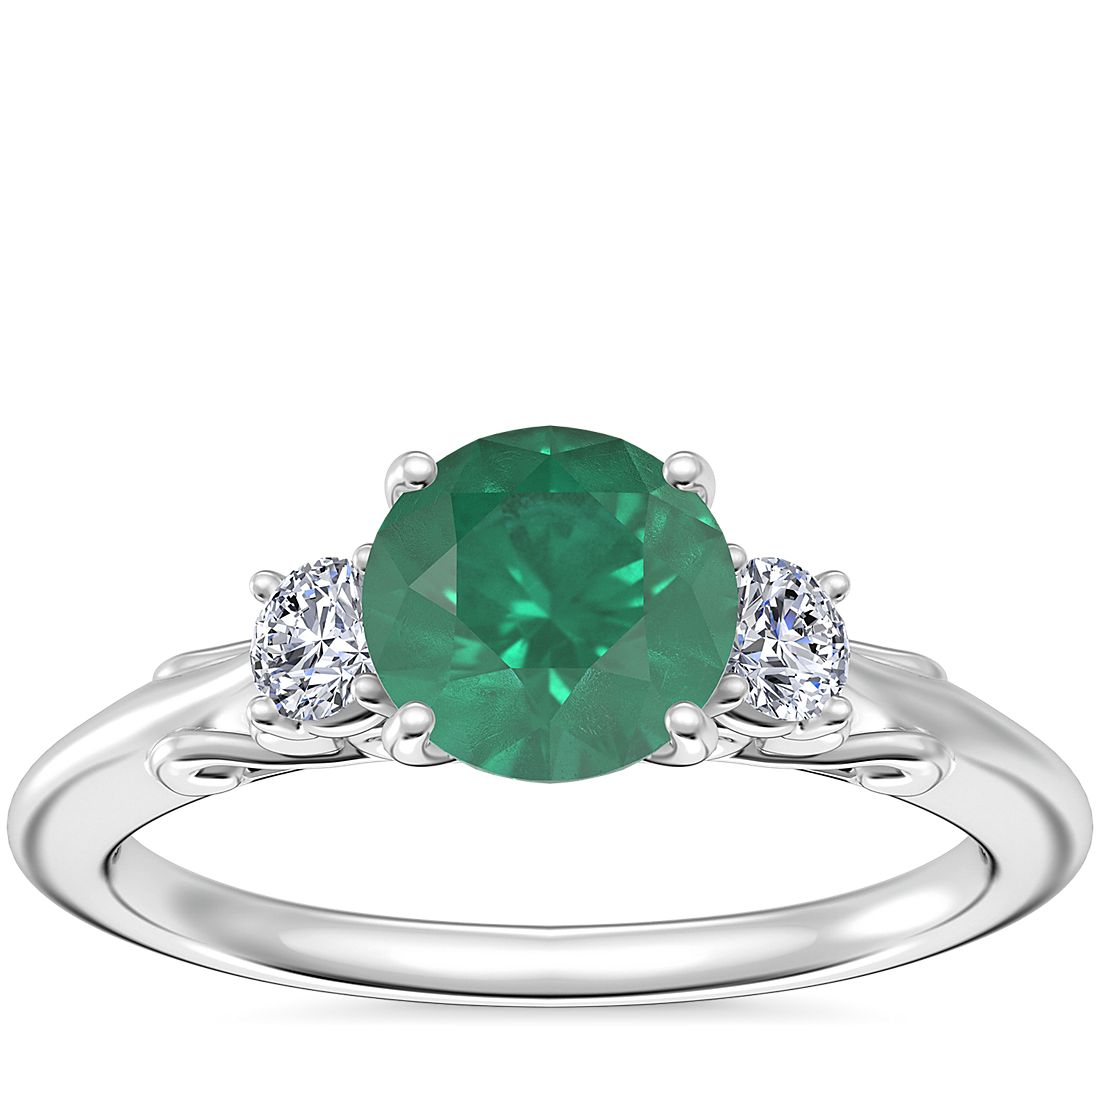 Vintage Three Stone Engagement Ring with Round Emerald in 14k White Gold (6.5mm)